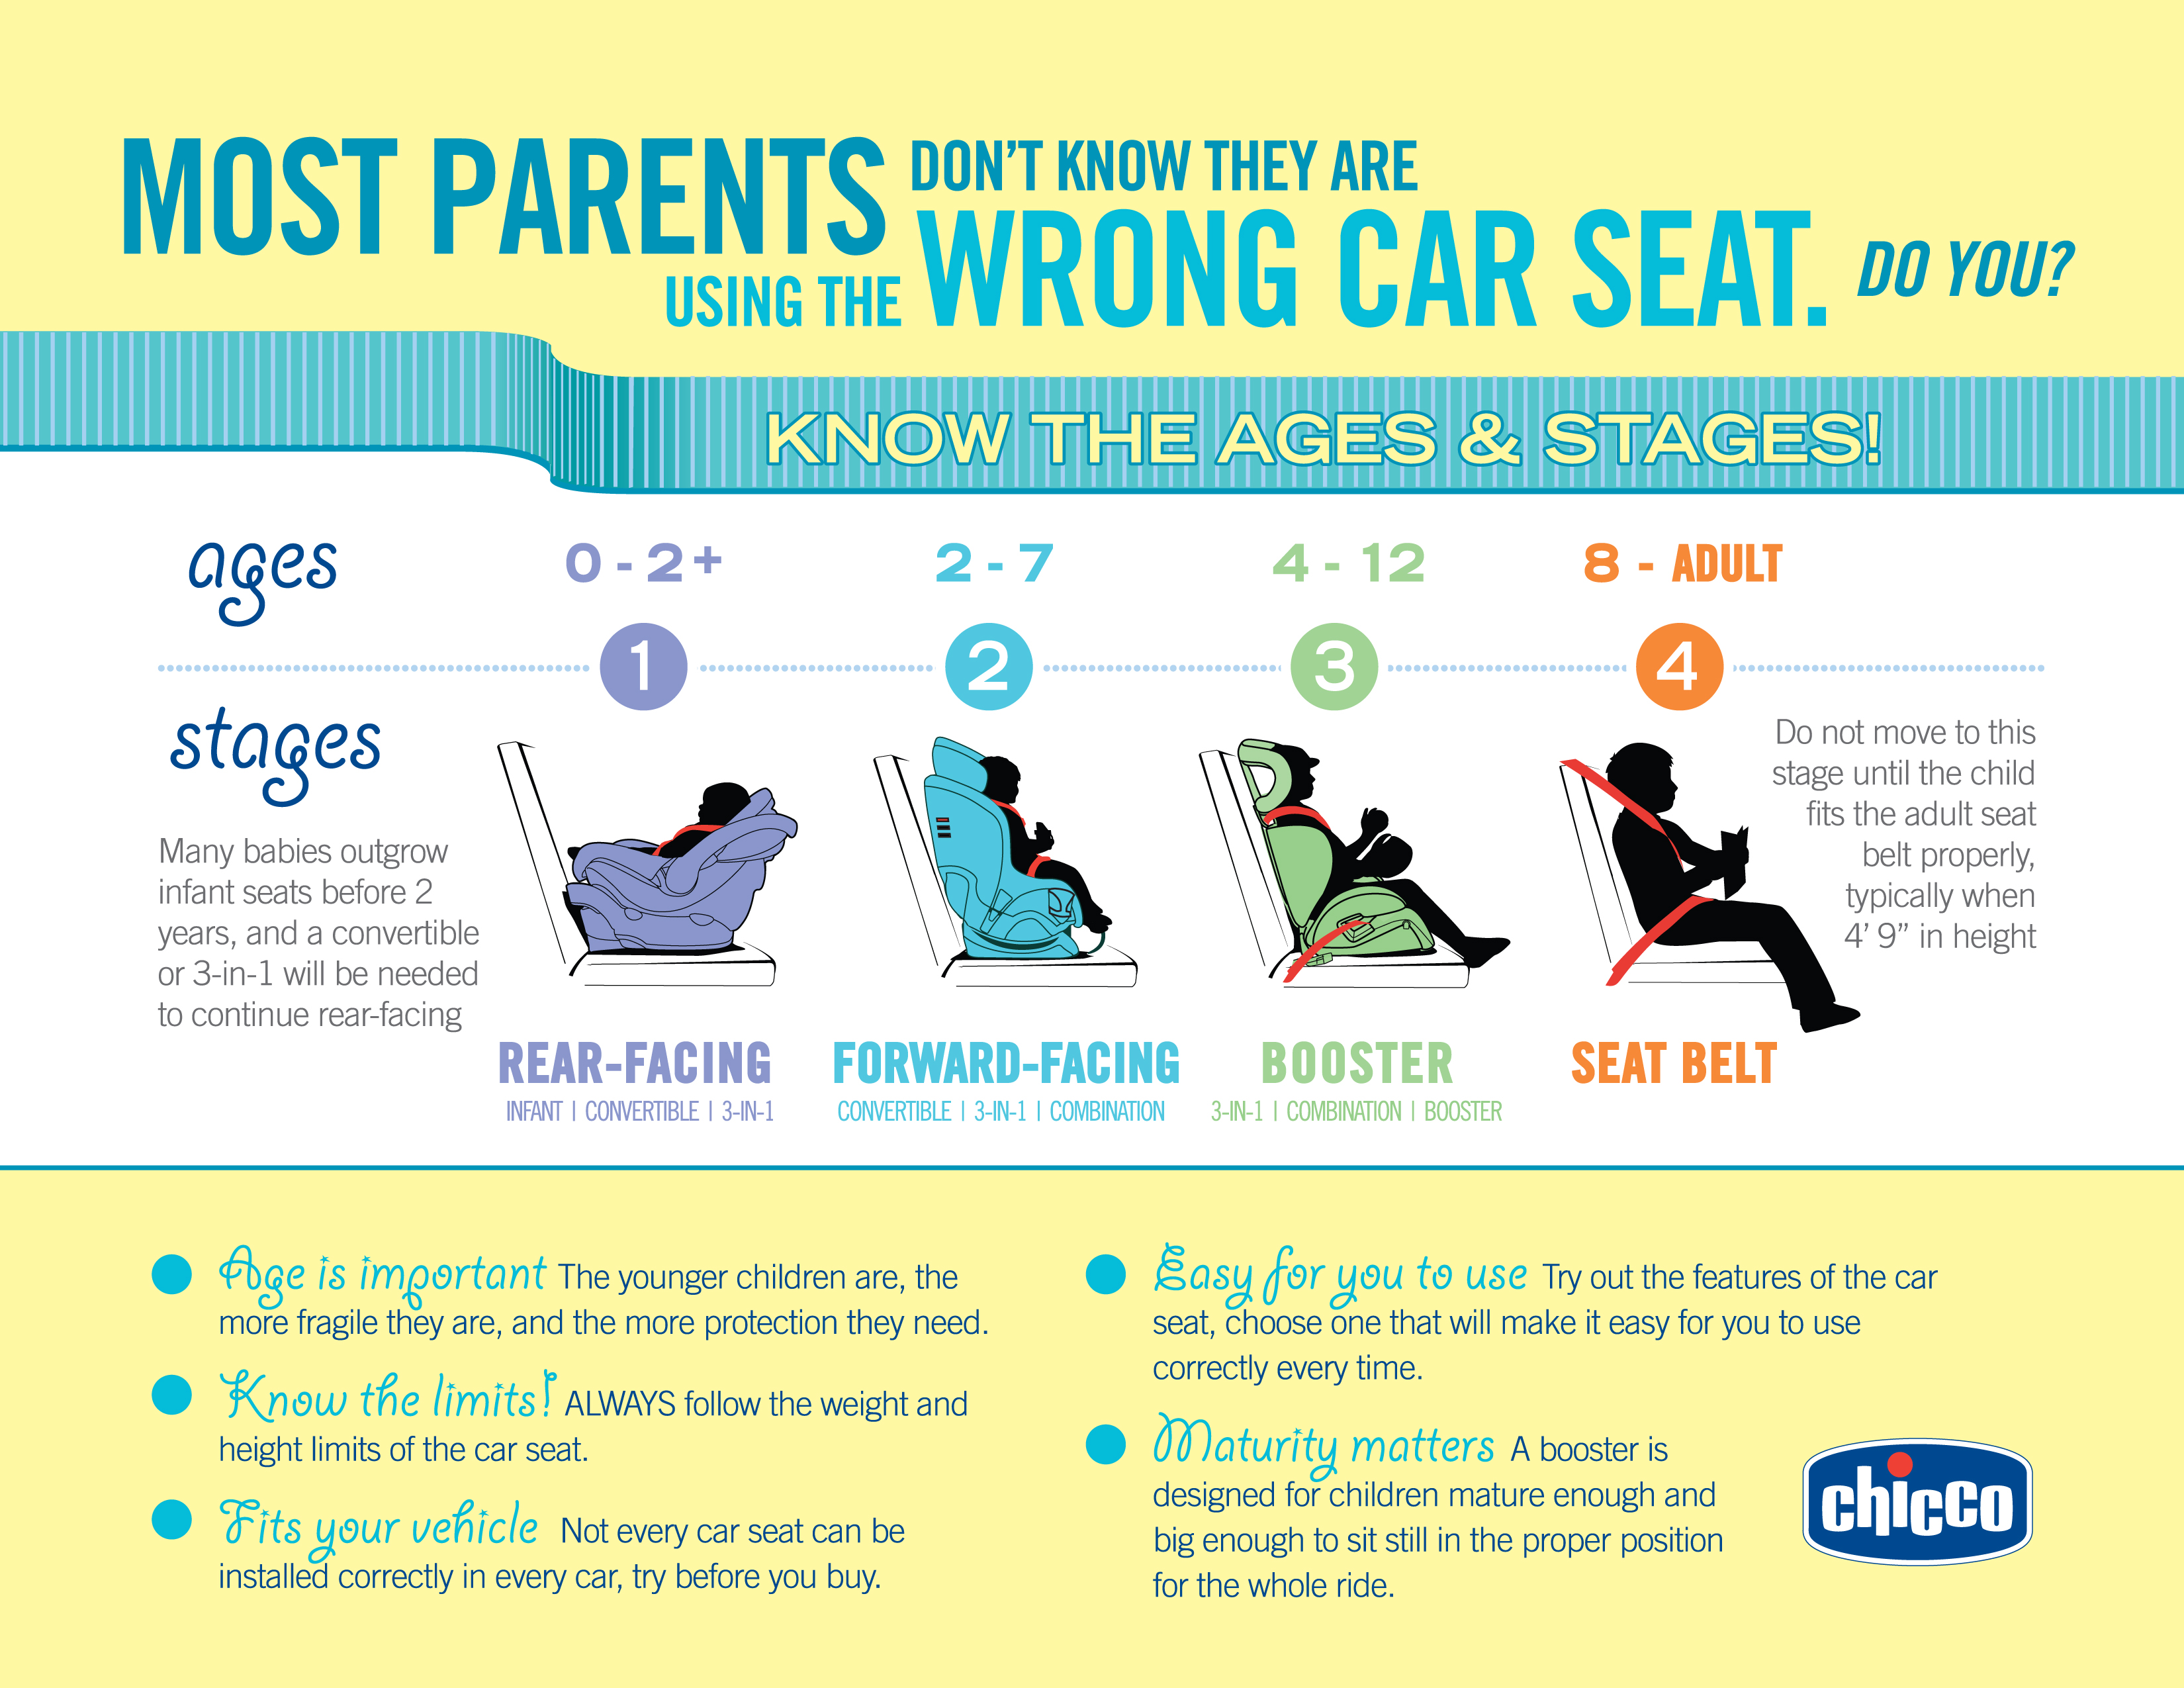 http://www.longwaitforisabella.com/wp-content/uploads/2015/01/Ages-and-Stages-of-Car-Seat-Usage.jpg